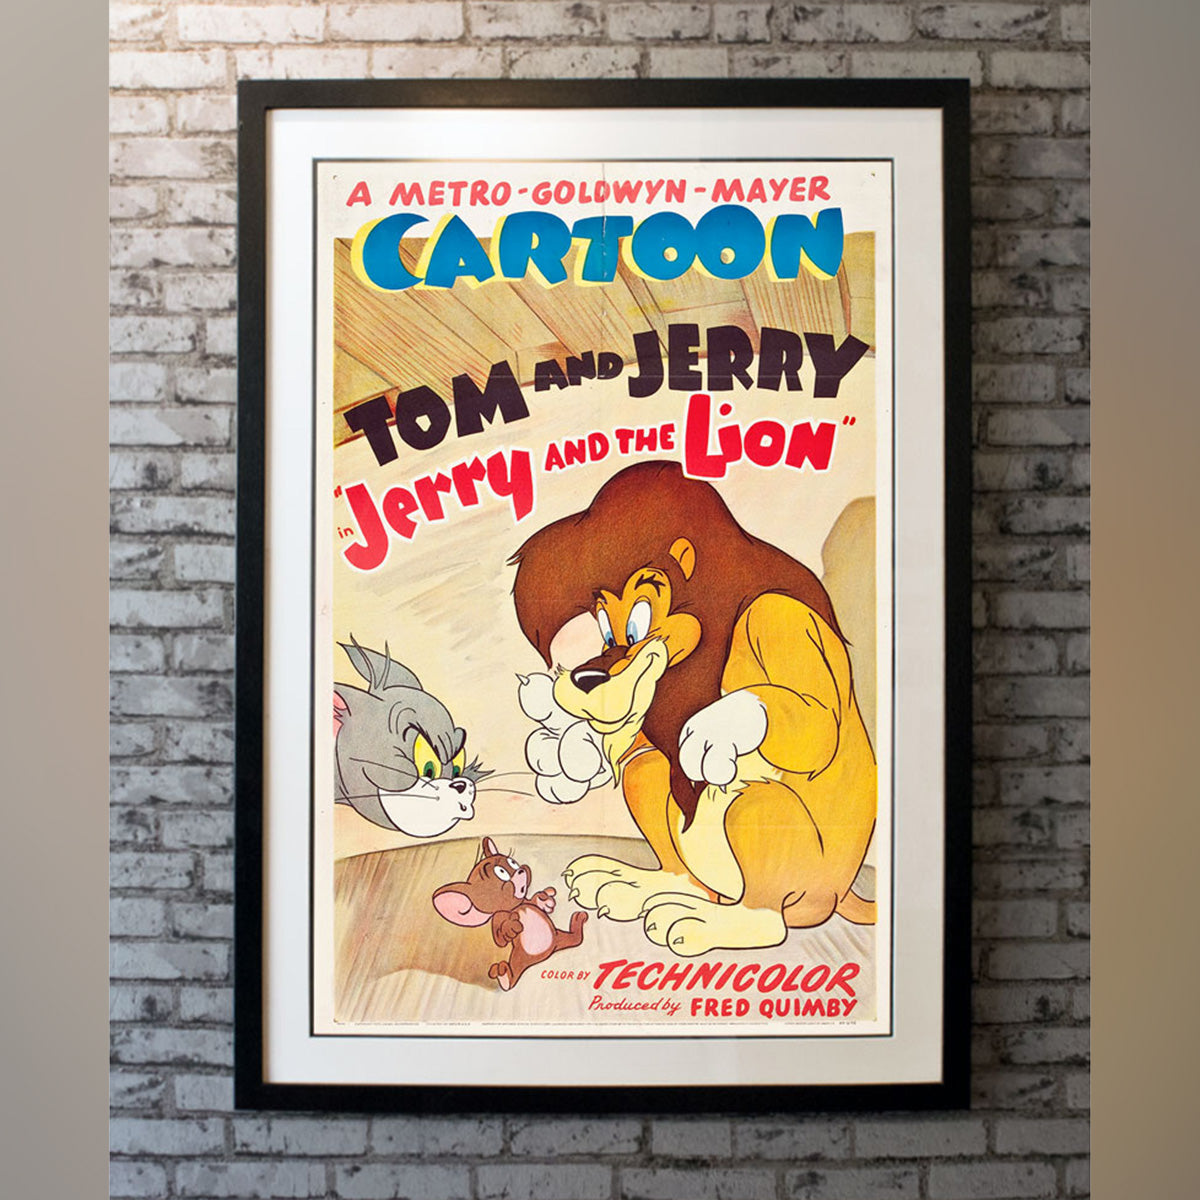 Original Movie Poster of Jerry And The Lion (1950)